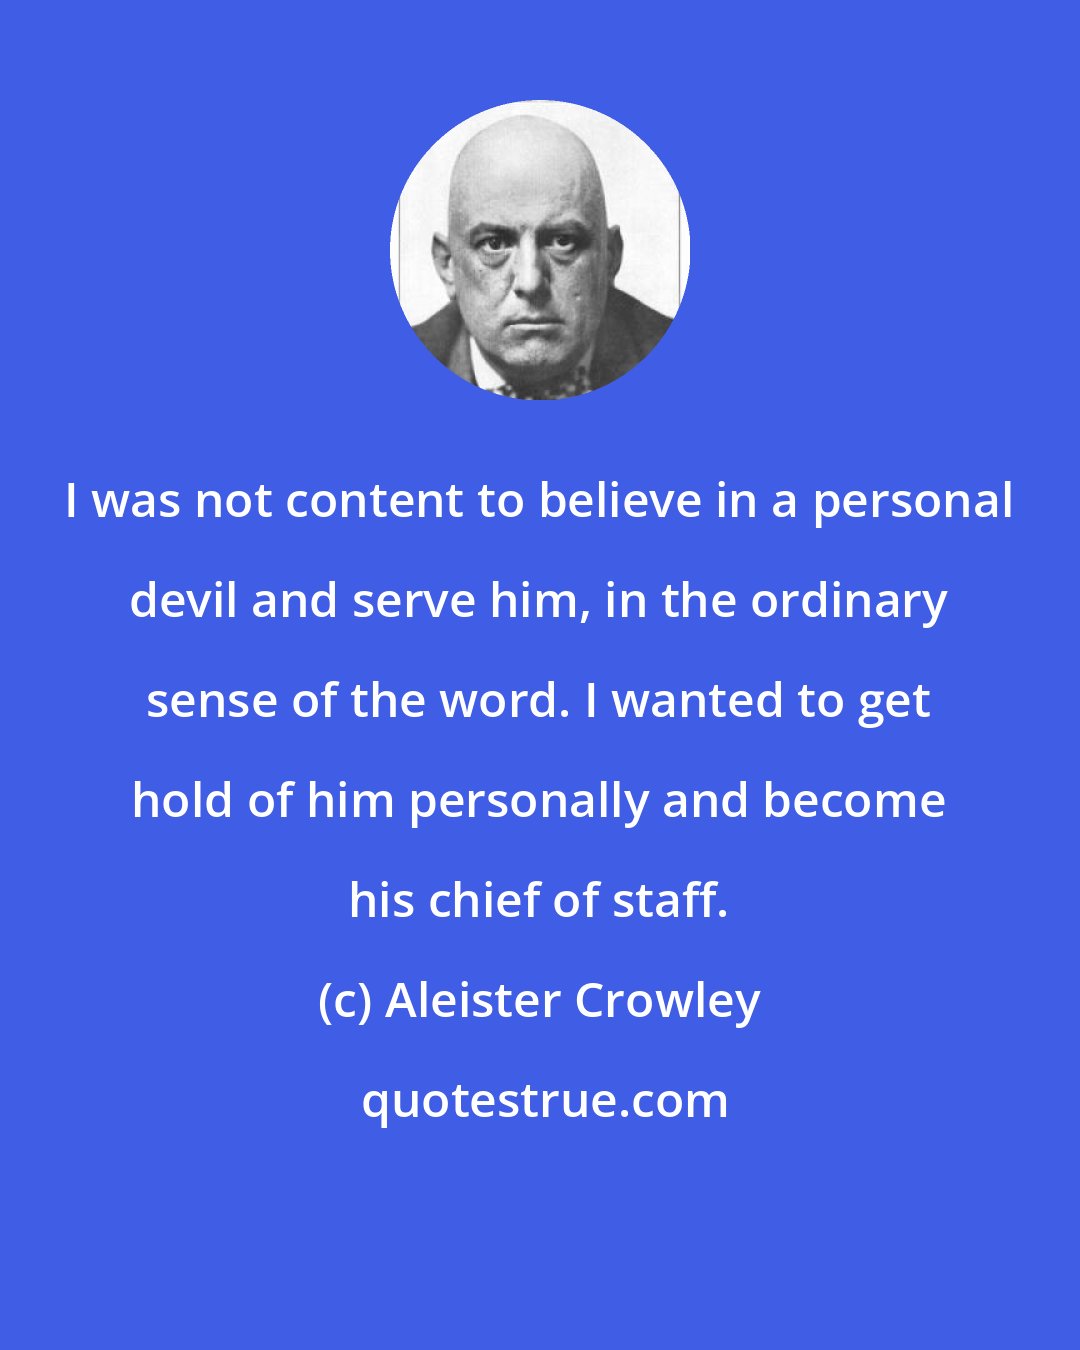 Aleister Crowley: I was not content to believe in a personal devil and serve him, in the ordinary sense of the word. I wanted to get hold of him personally and become his chief of staff.